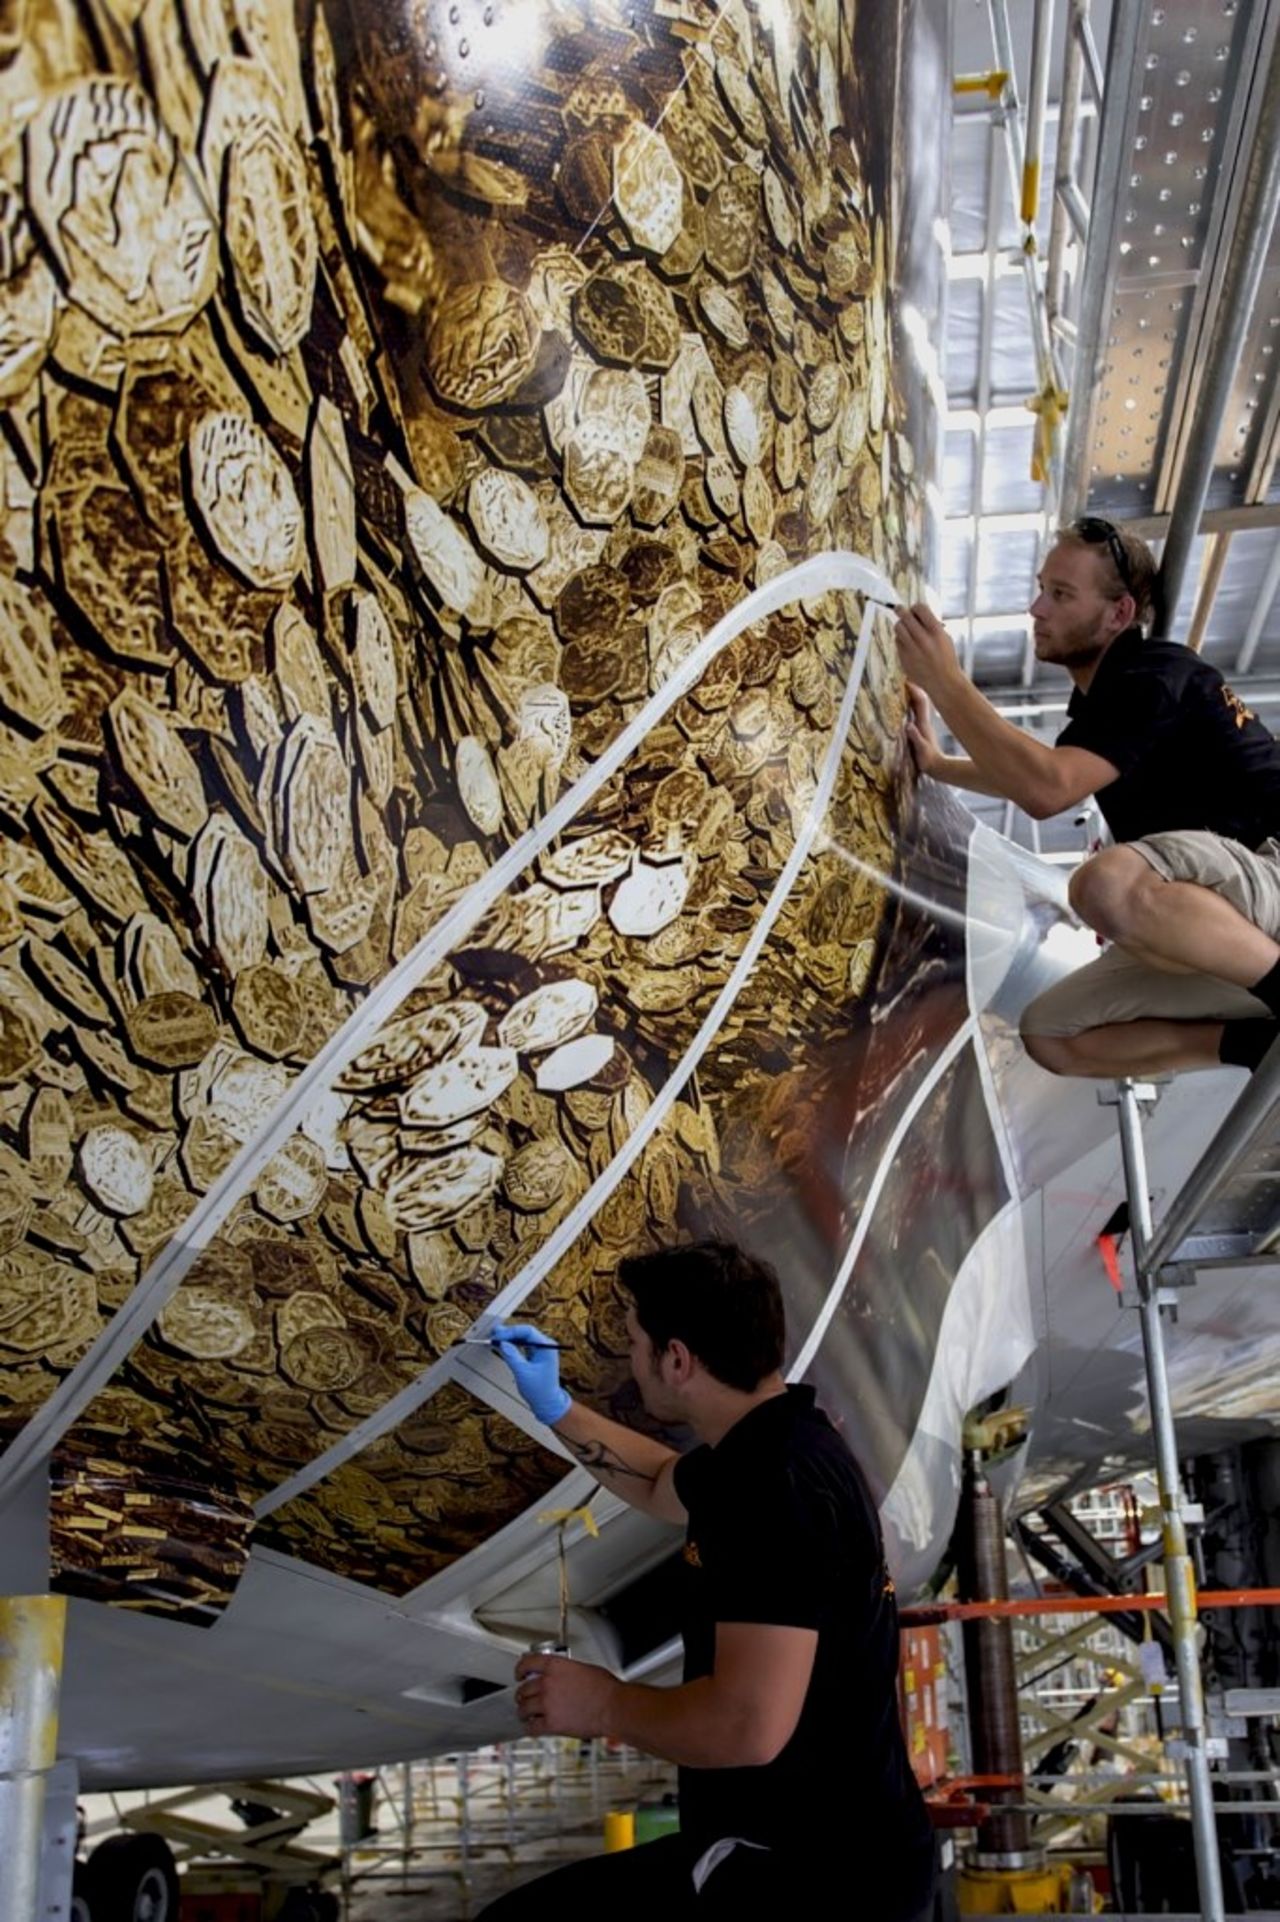 This closeup of Air New Zealand's new Hobbit-themed livery as it was being produced shows how intricate the paint job actually is.  